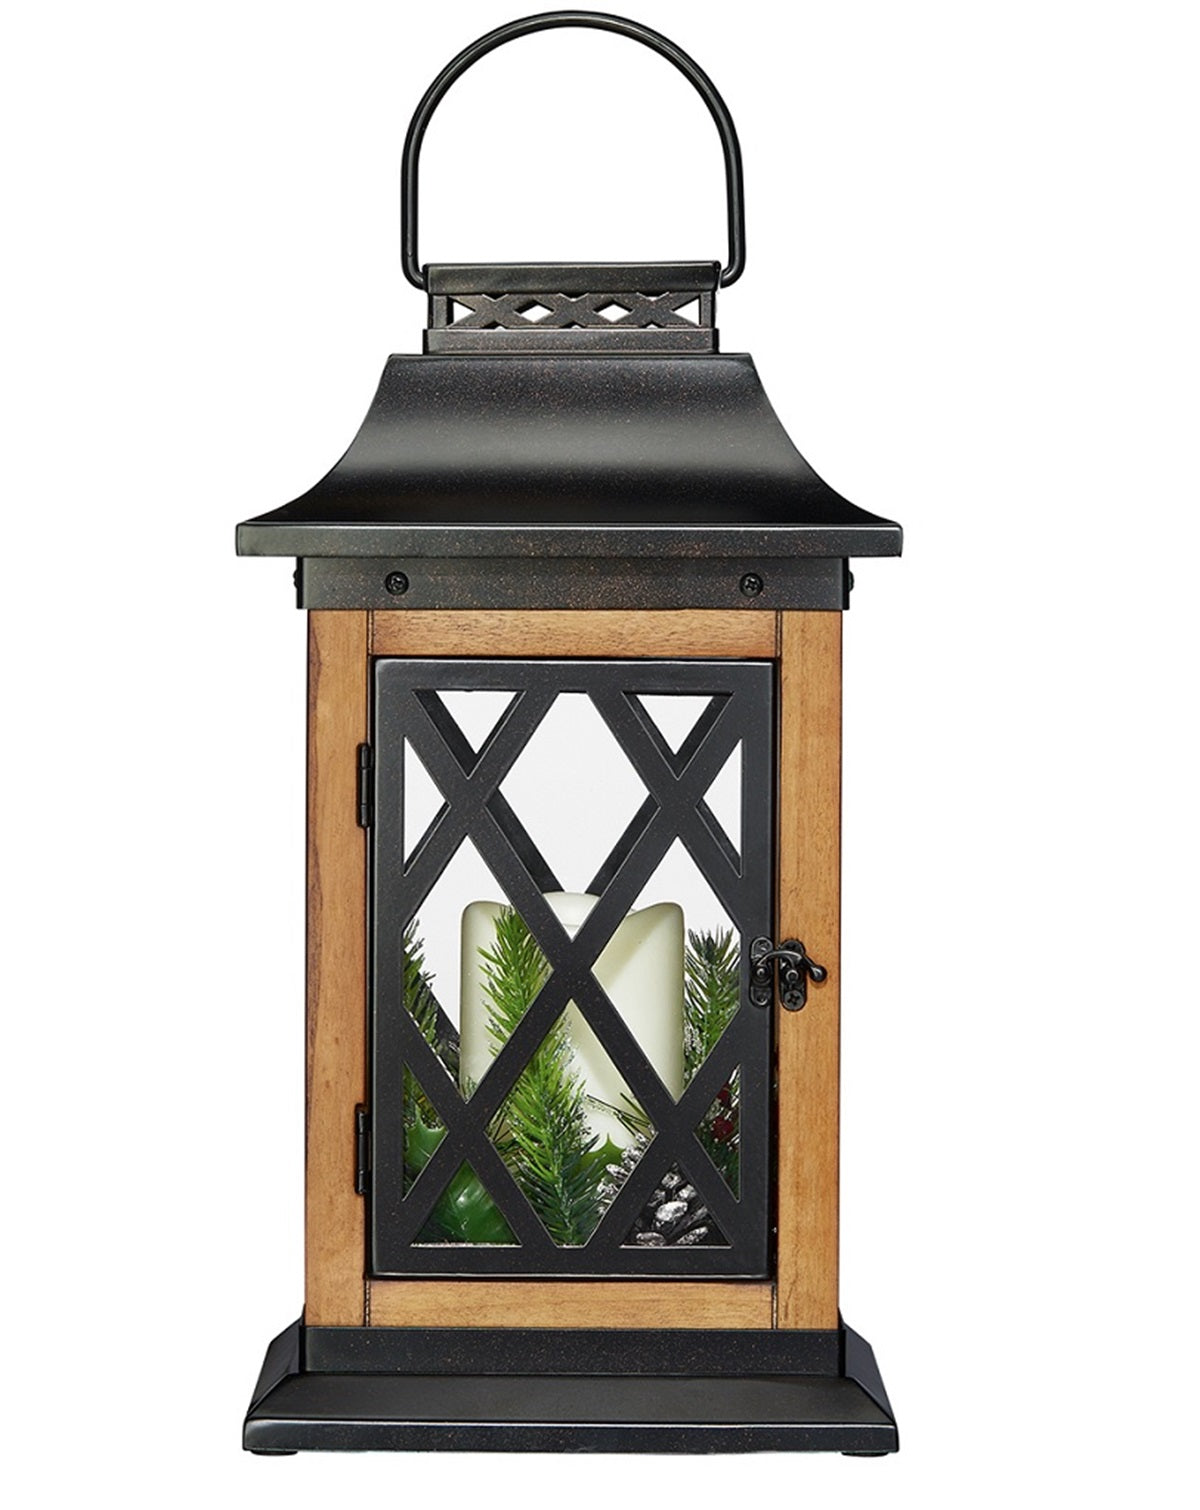 15 inch Decorative Wood and Metal Lantern with LED Flickering Candle